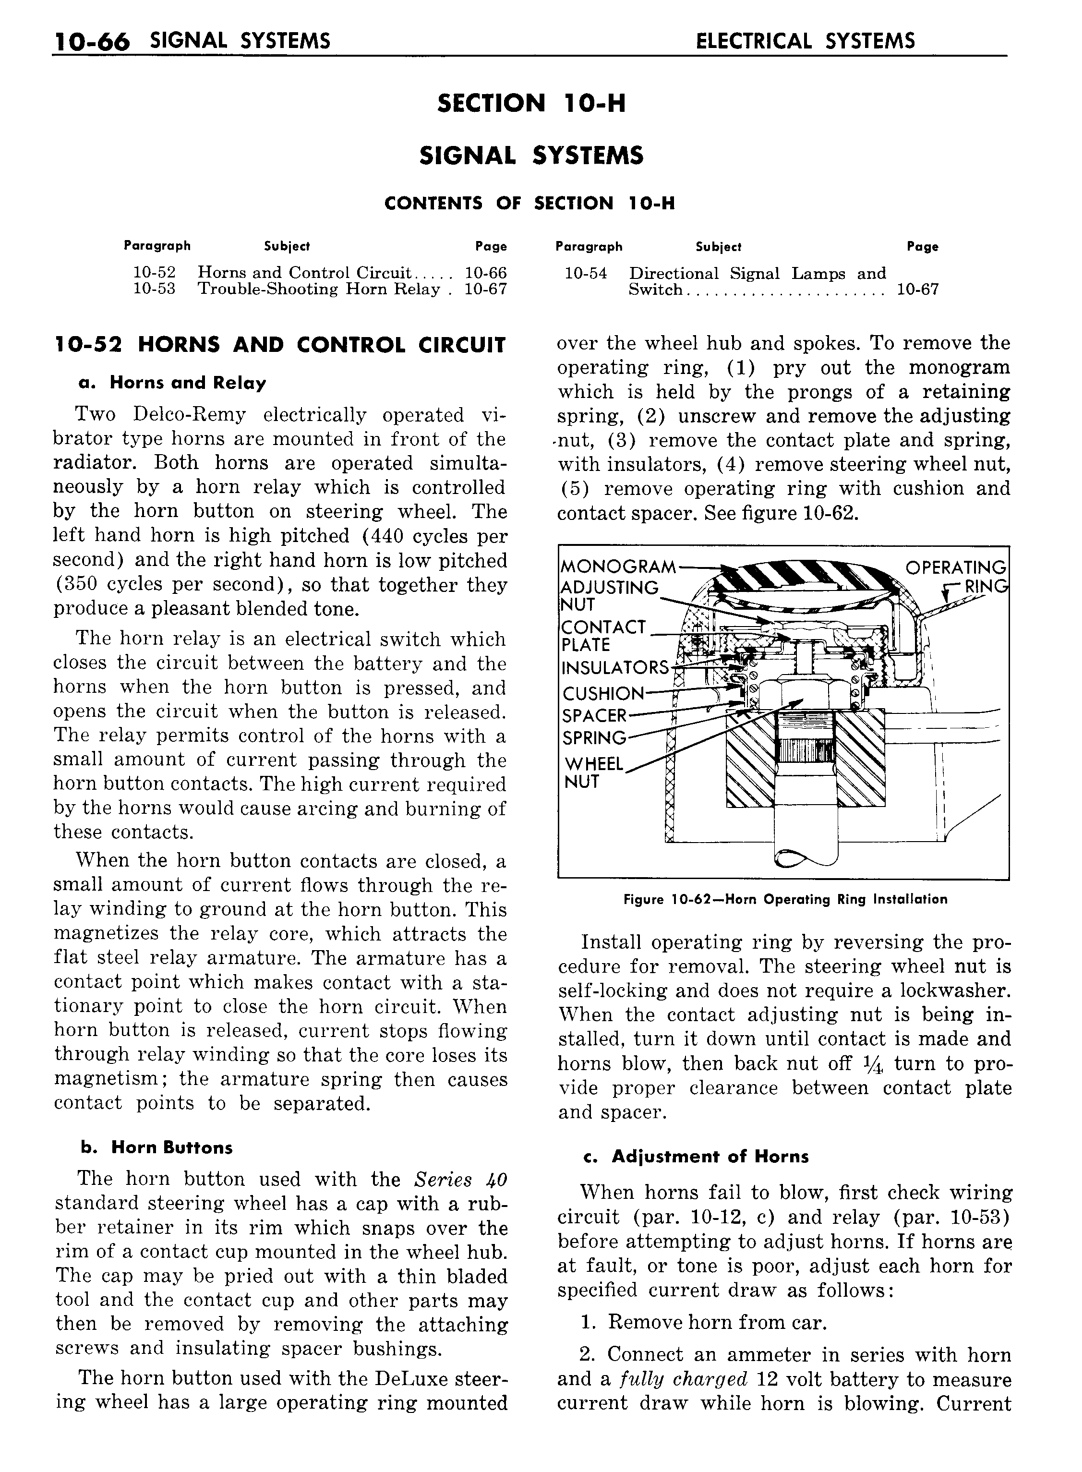 n_11 1957 Buick Shop Manual - Electrical Systems-066-066.jpg